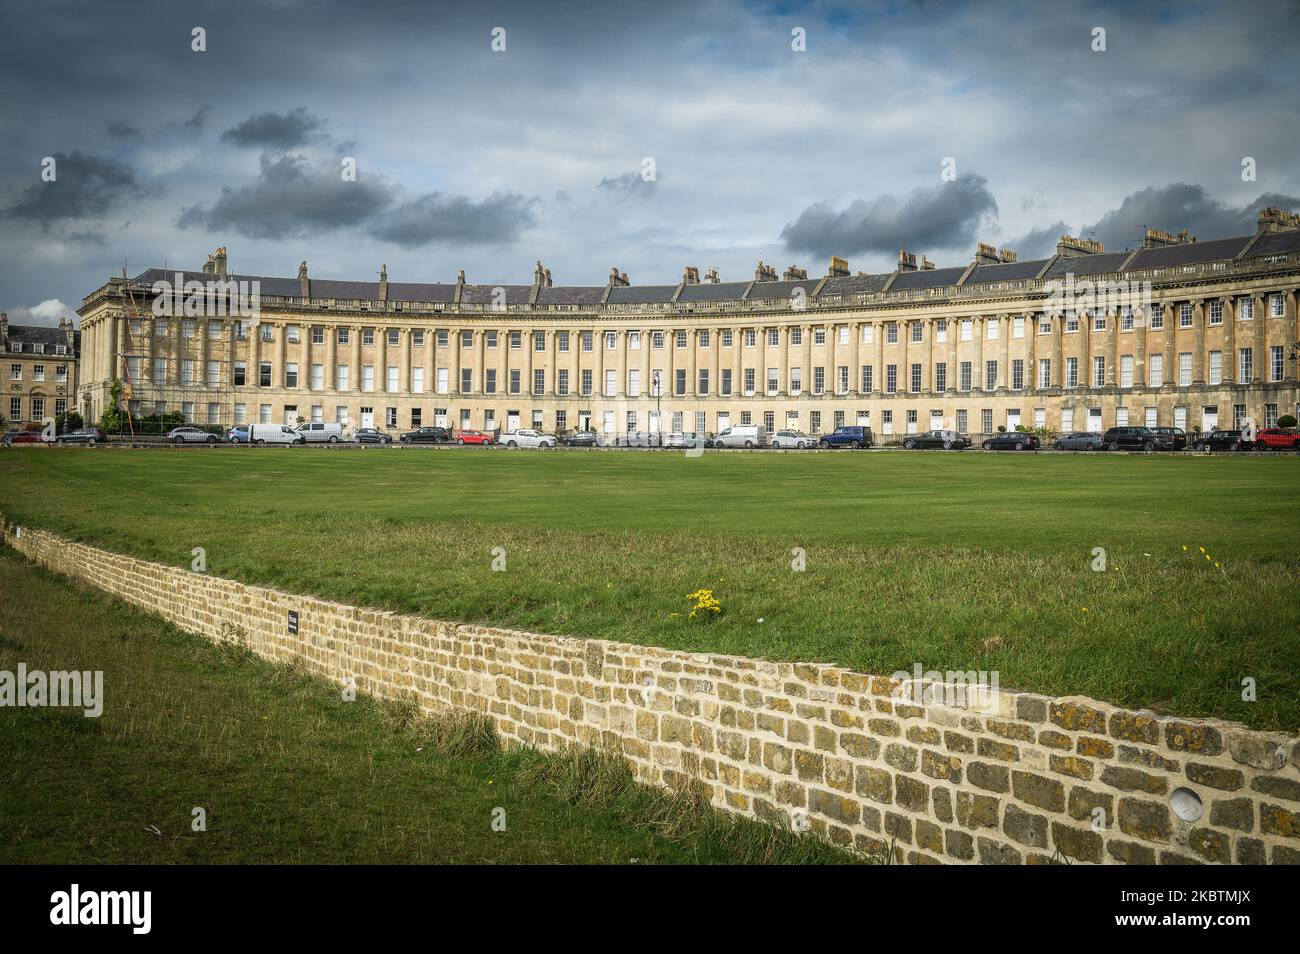 Images from the city of Bath, Somerset, England, United Kingdom. Houses on The Royal Crescent. Picture by Paul Heyes, Tuesday/Wednesday October 11/12, Stock Photo